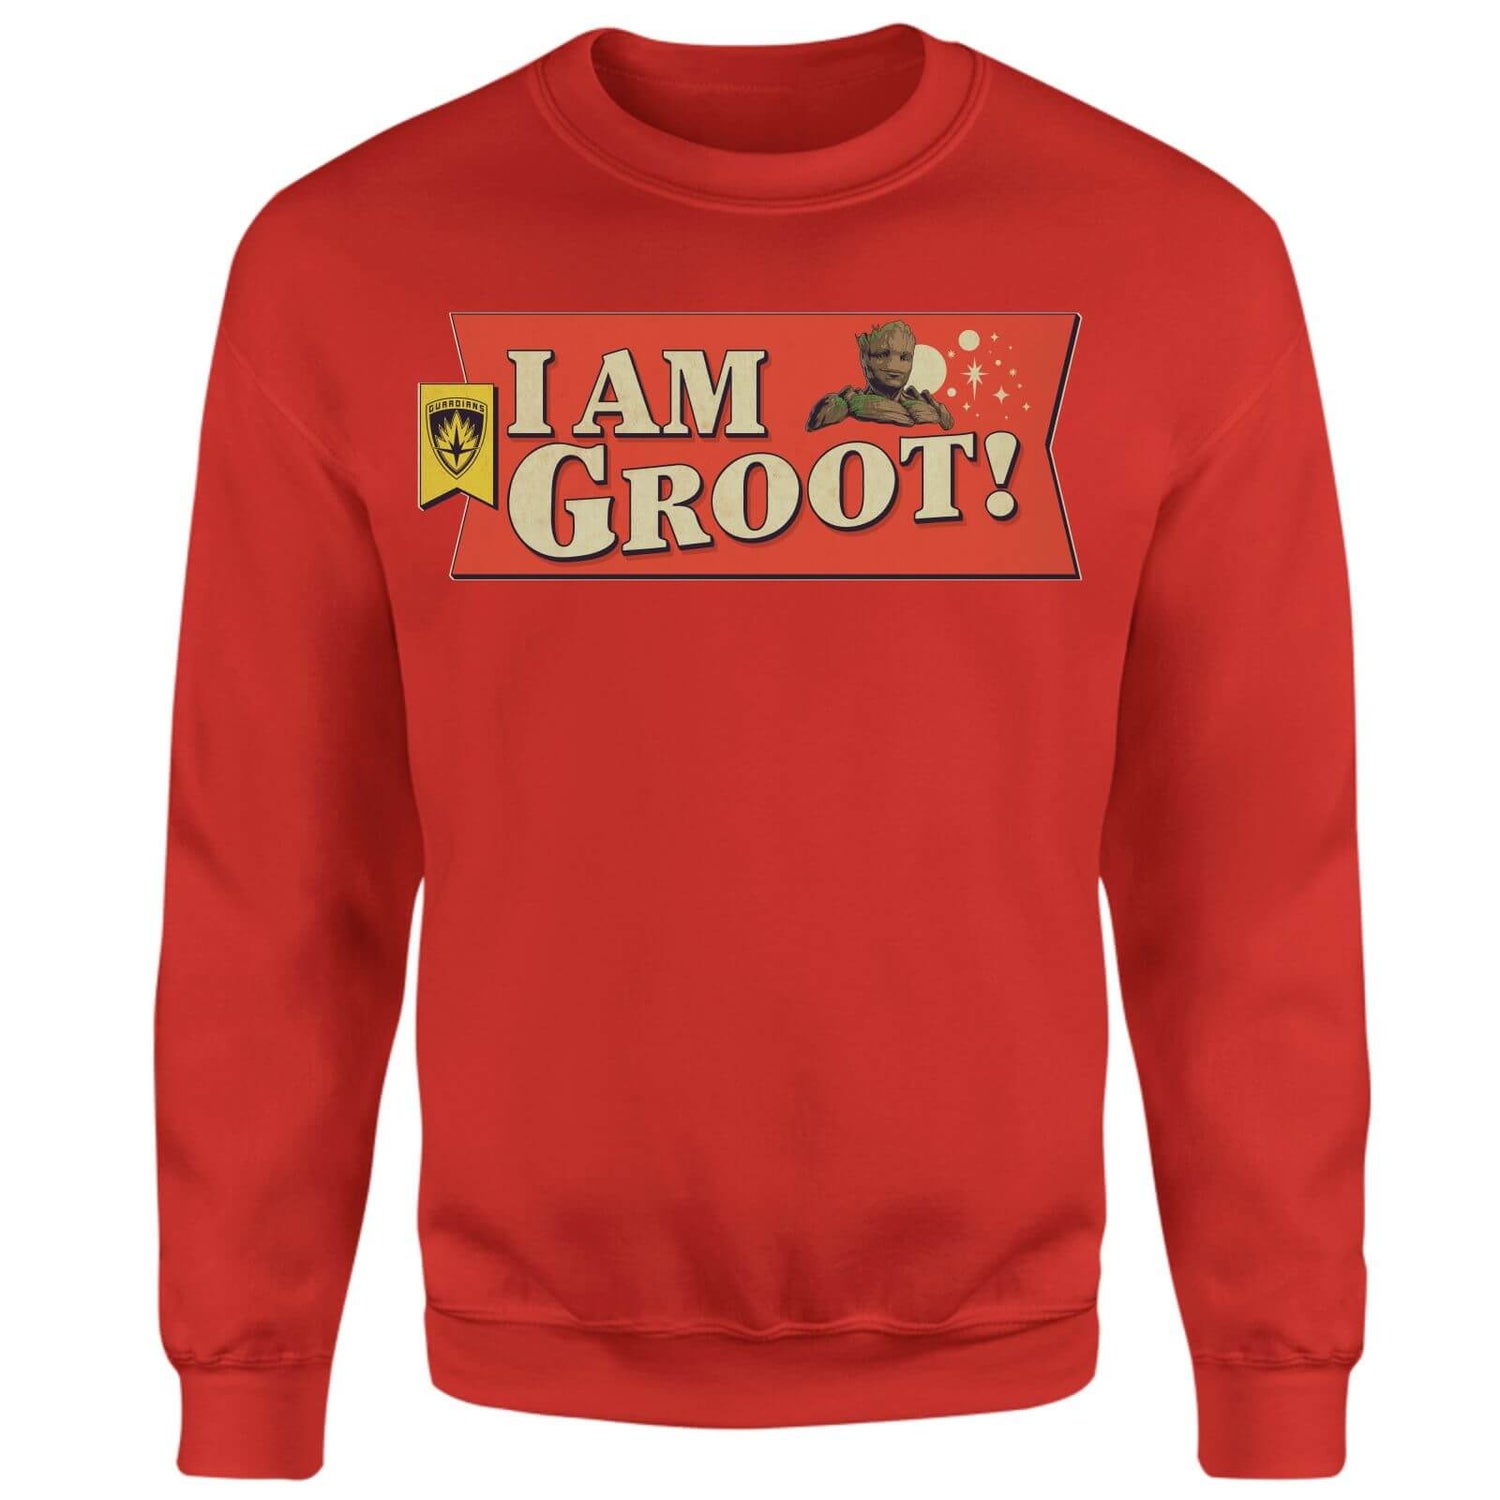 Guardians of the Galaxy I Am Groot! Sweatshirt - Red